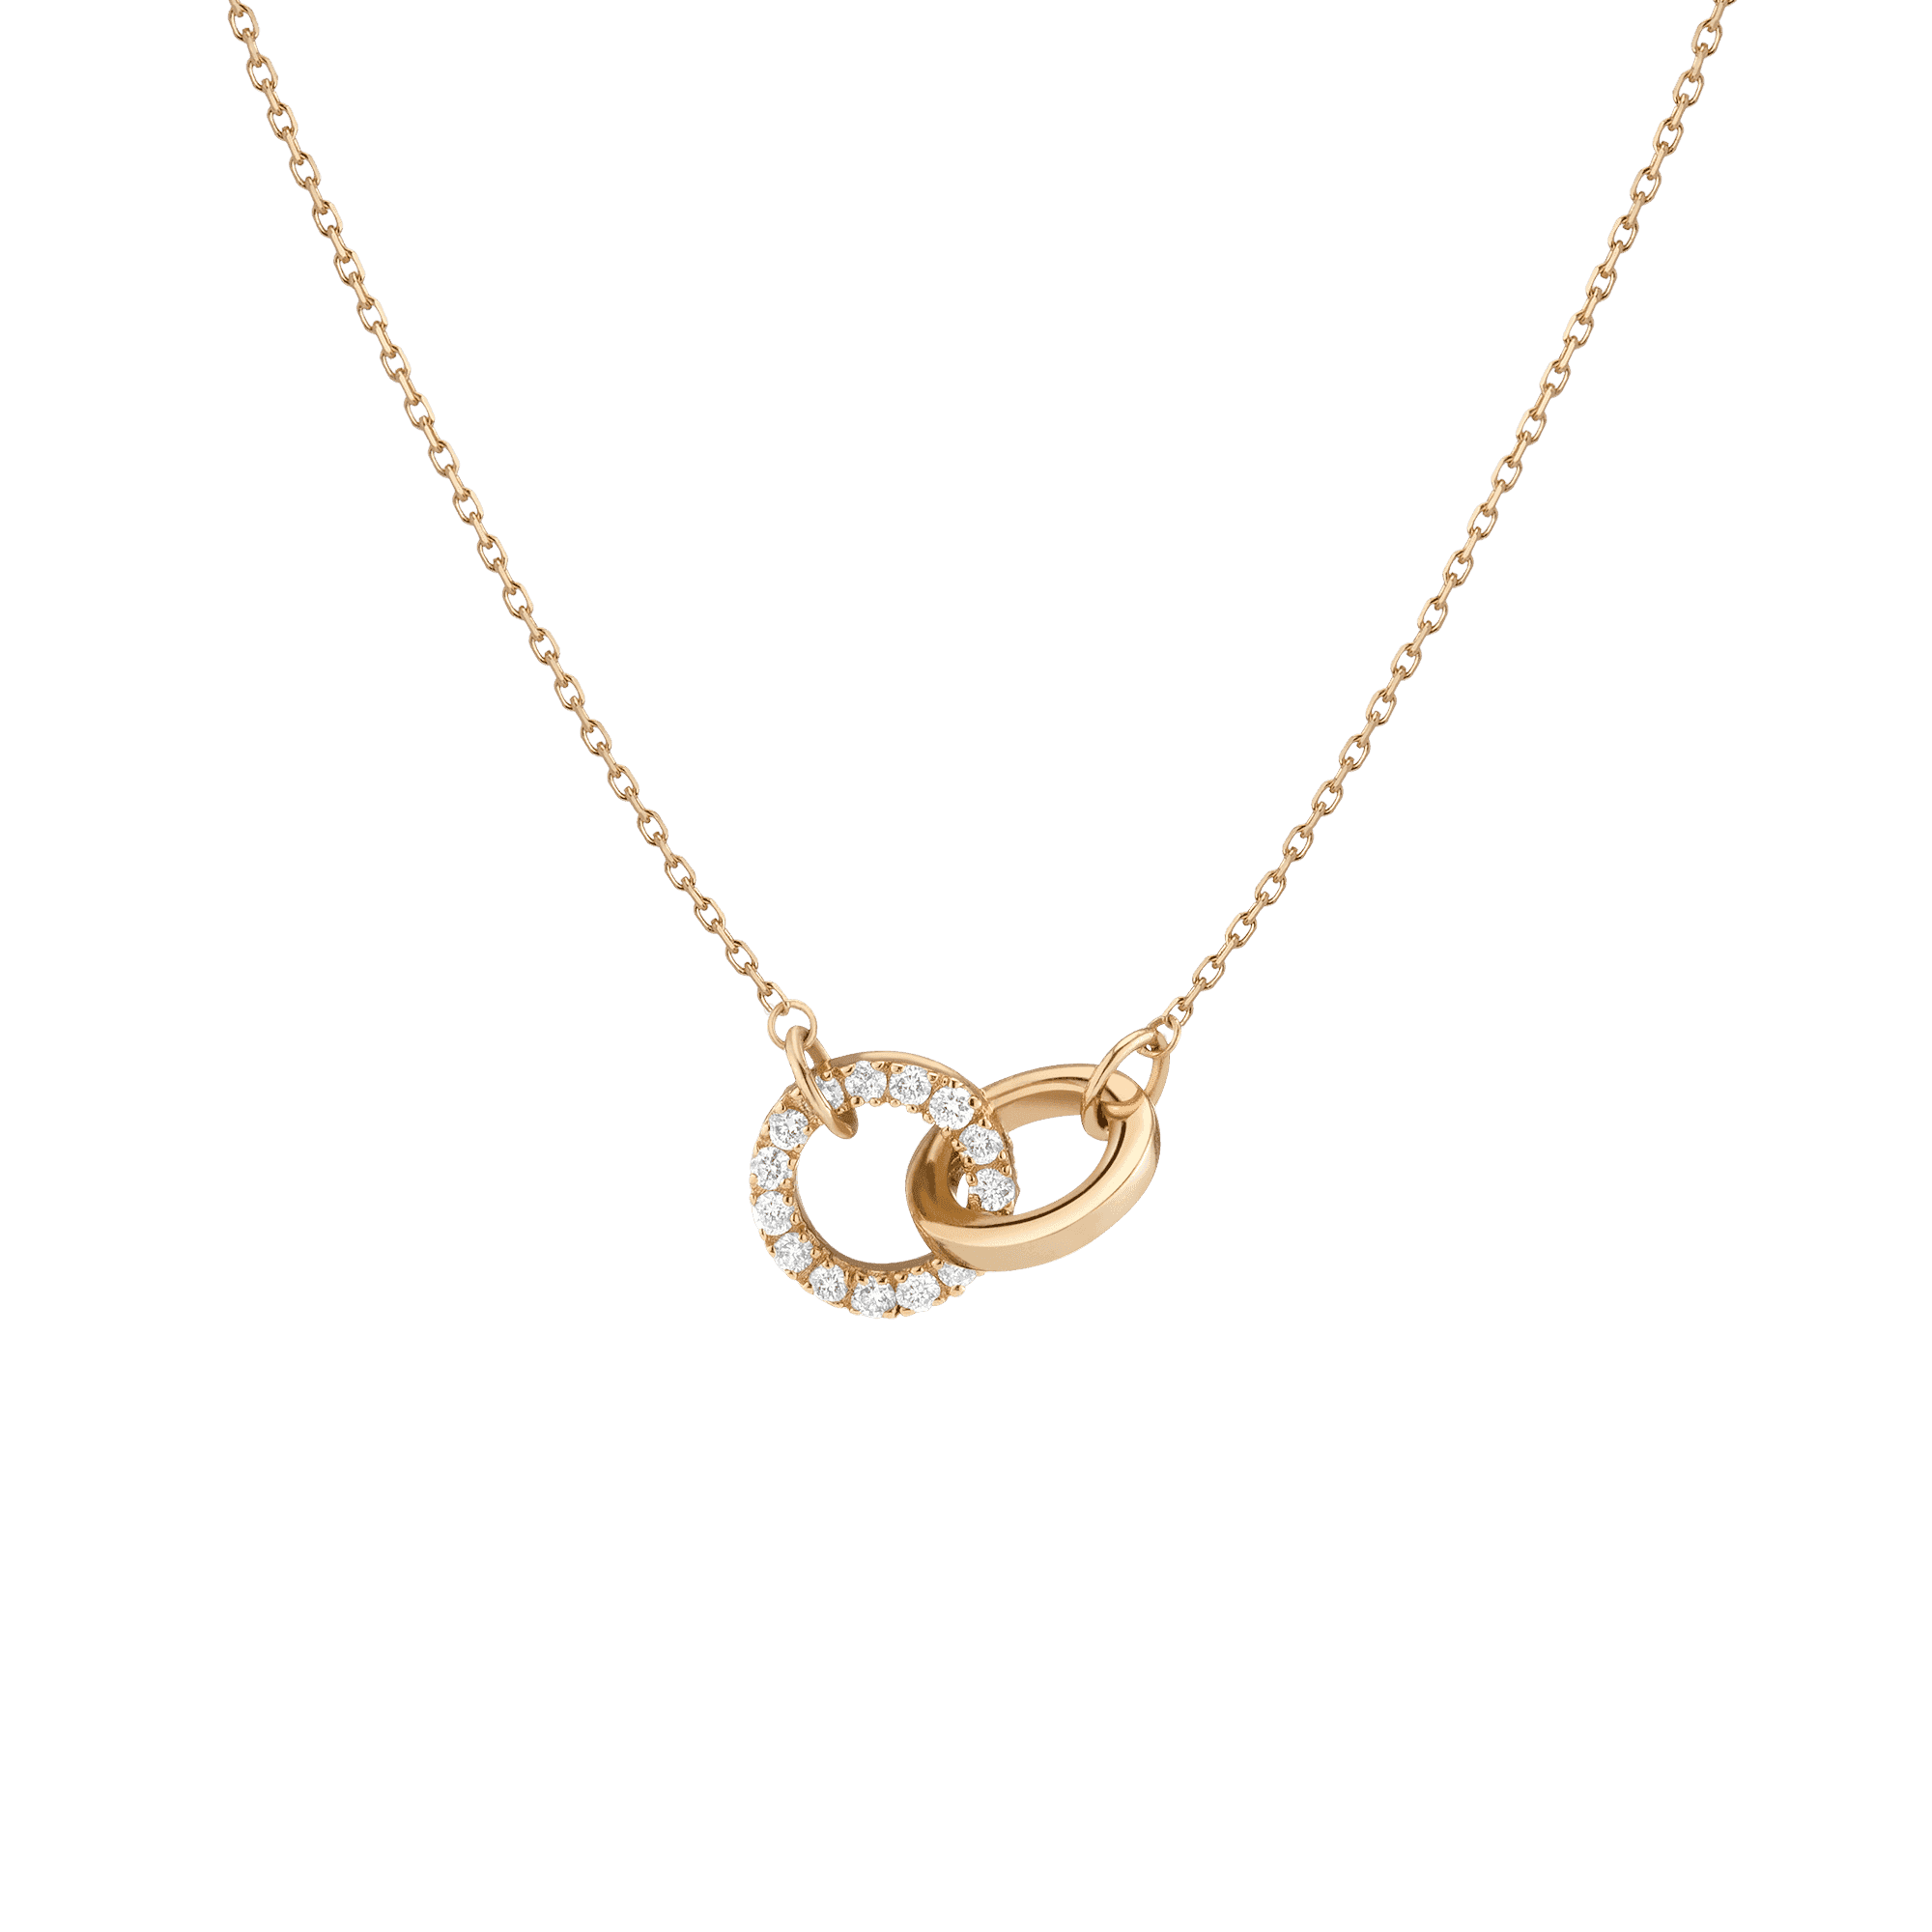 Aurate New York Diamond Connection Necklace, 18K Yellow Gold